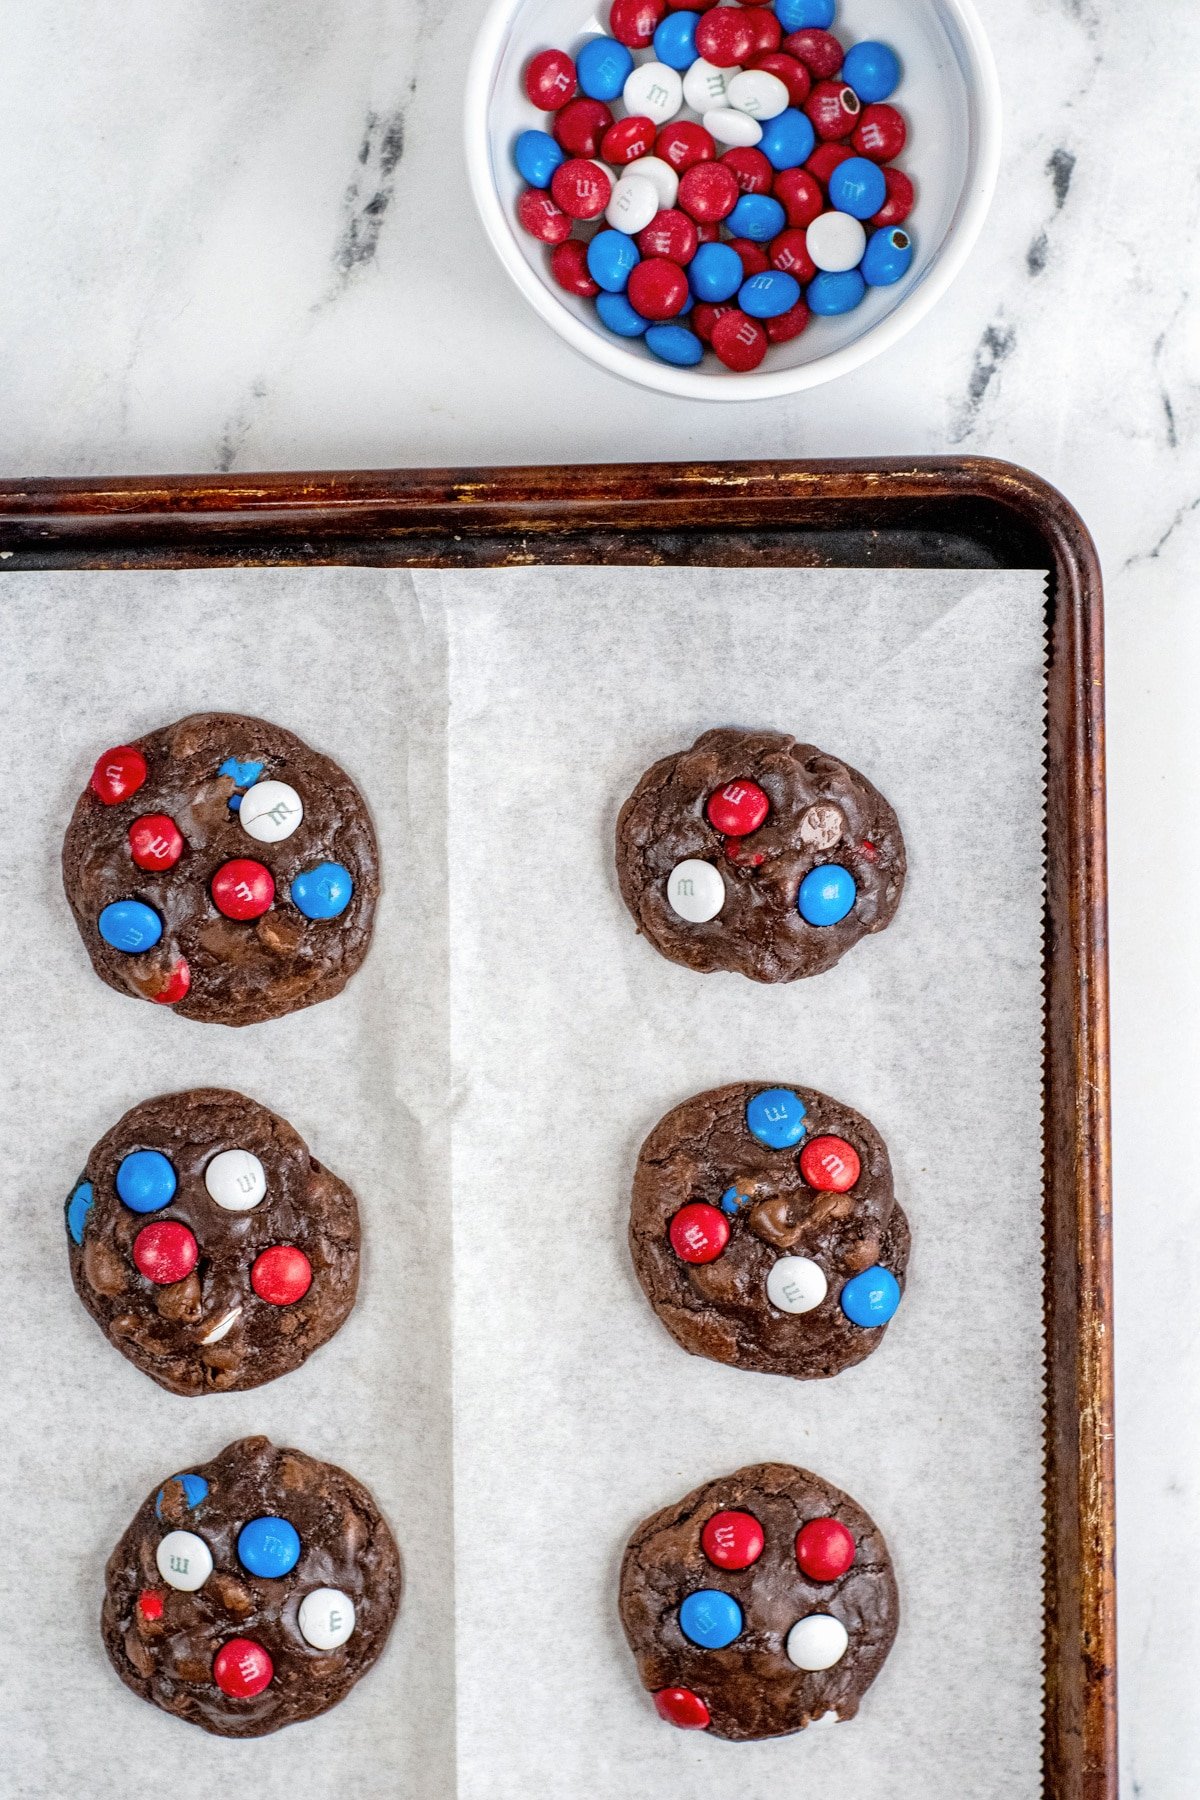 add extra m and ms after baking when warm